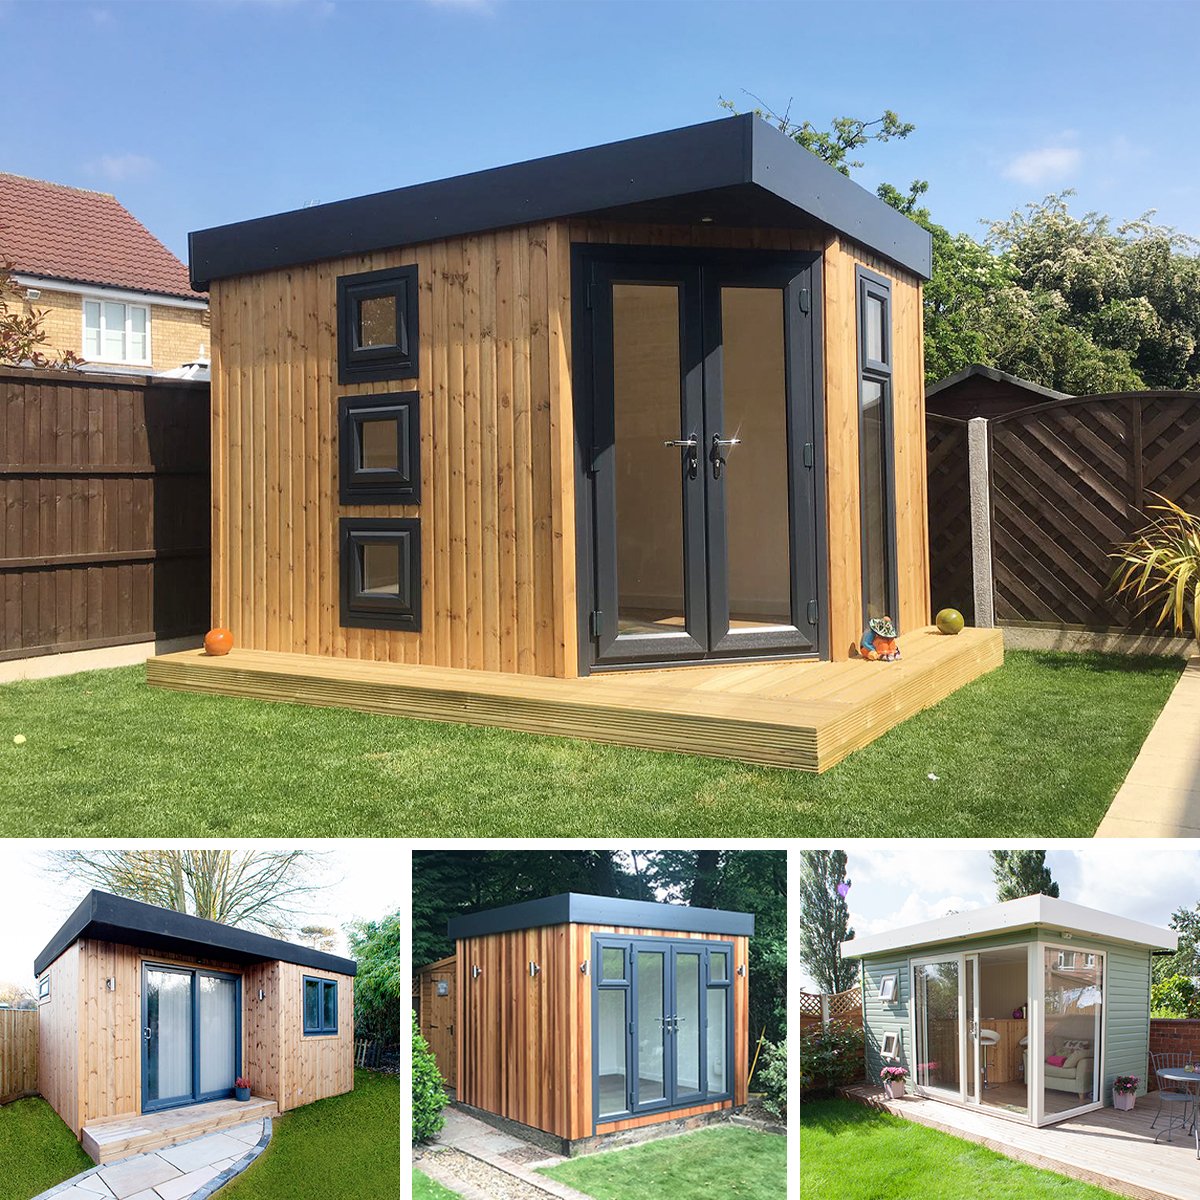 Home office vs shed in the garden- Cabin Master UK